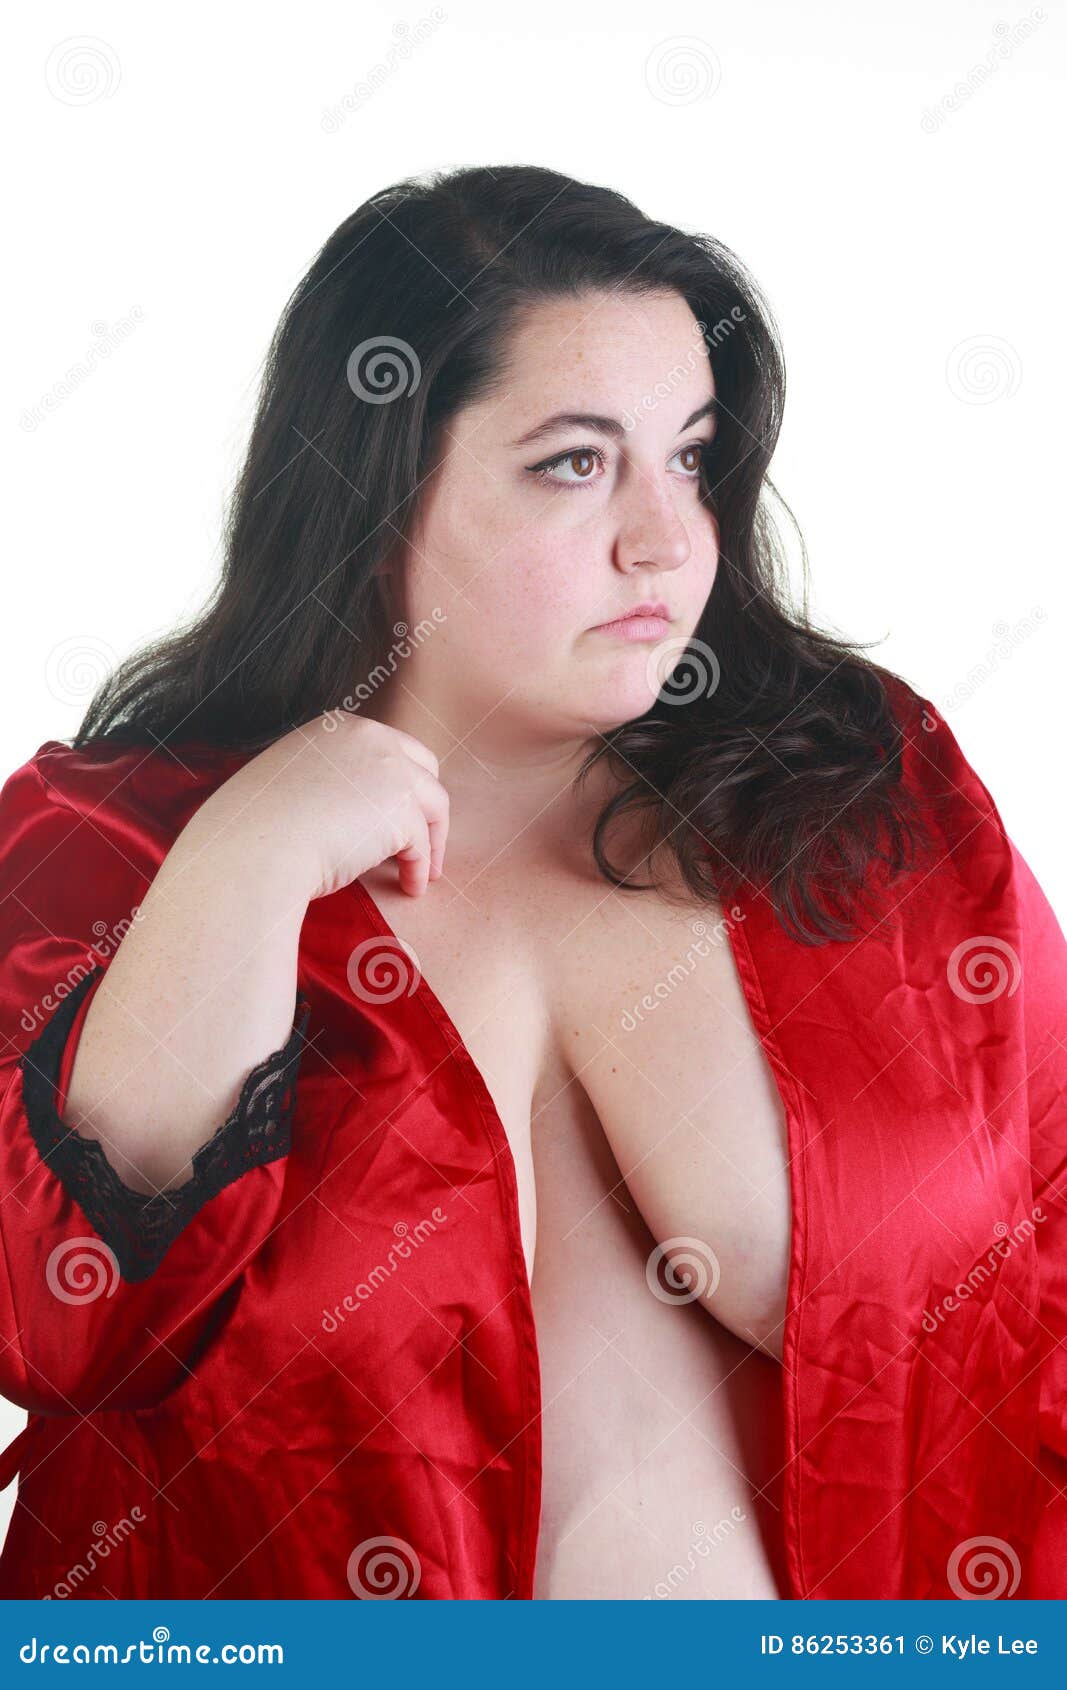 Plus Size Woman Posing in the Studio Stock Image - Image of heavy, light:  86253361